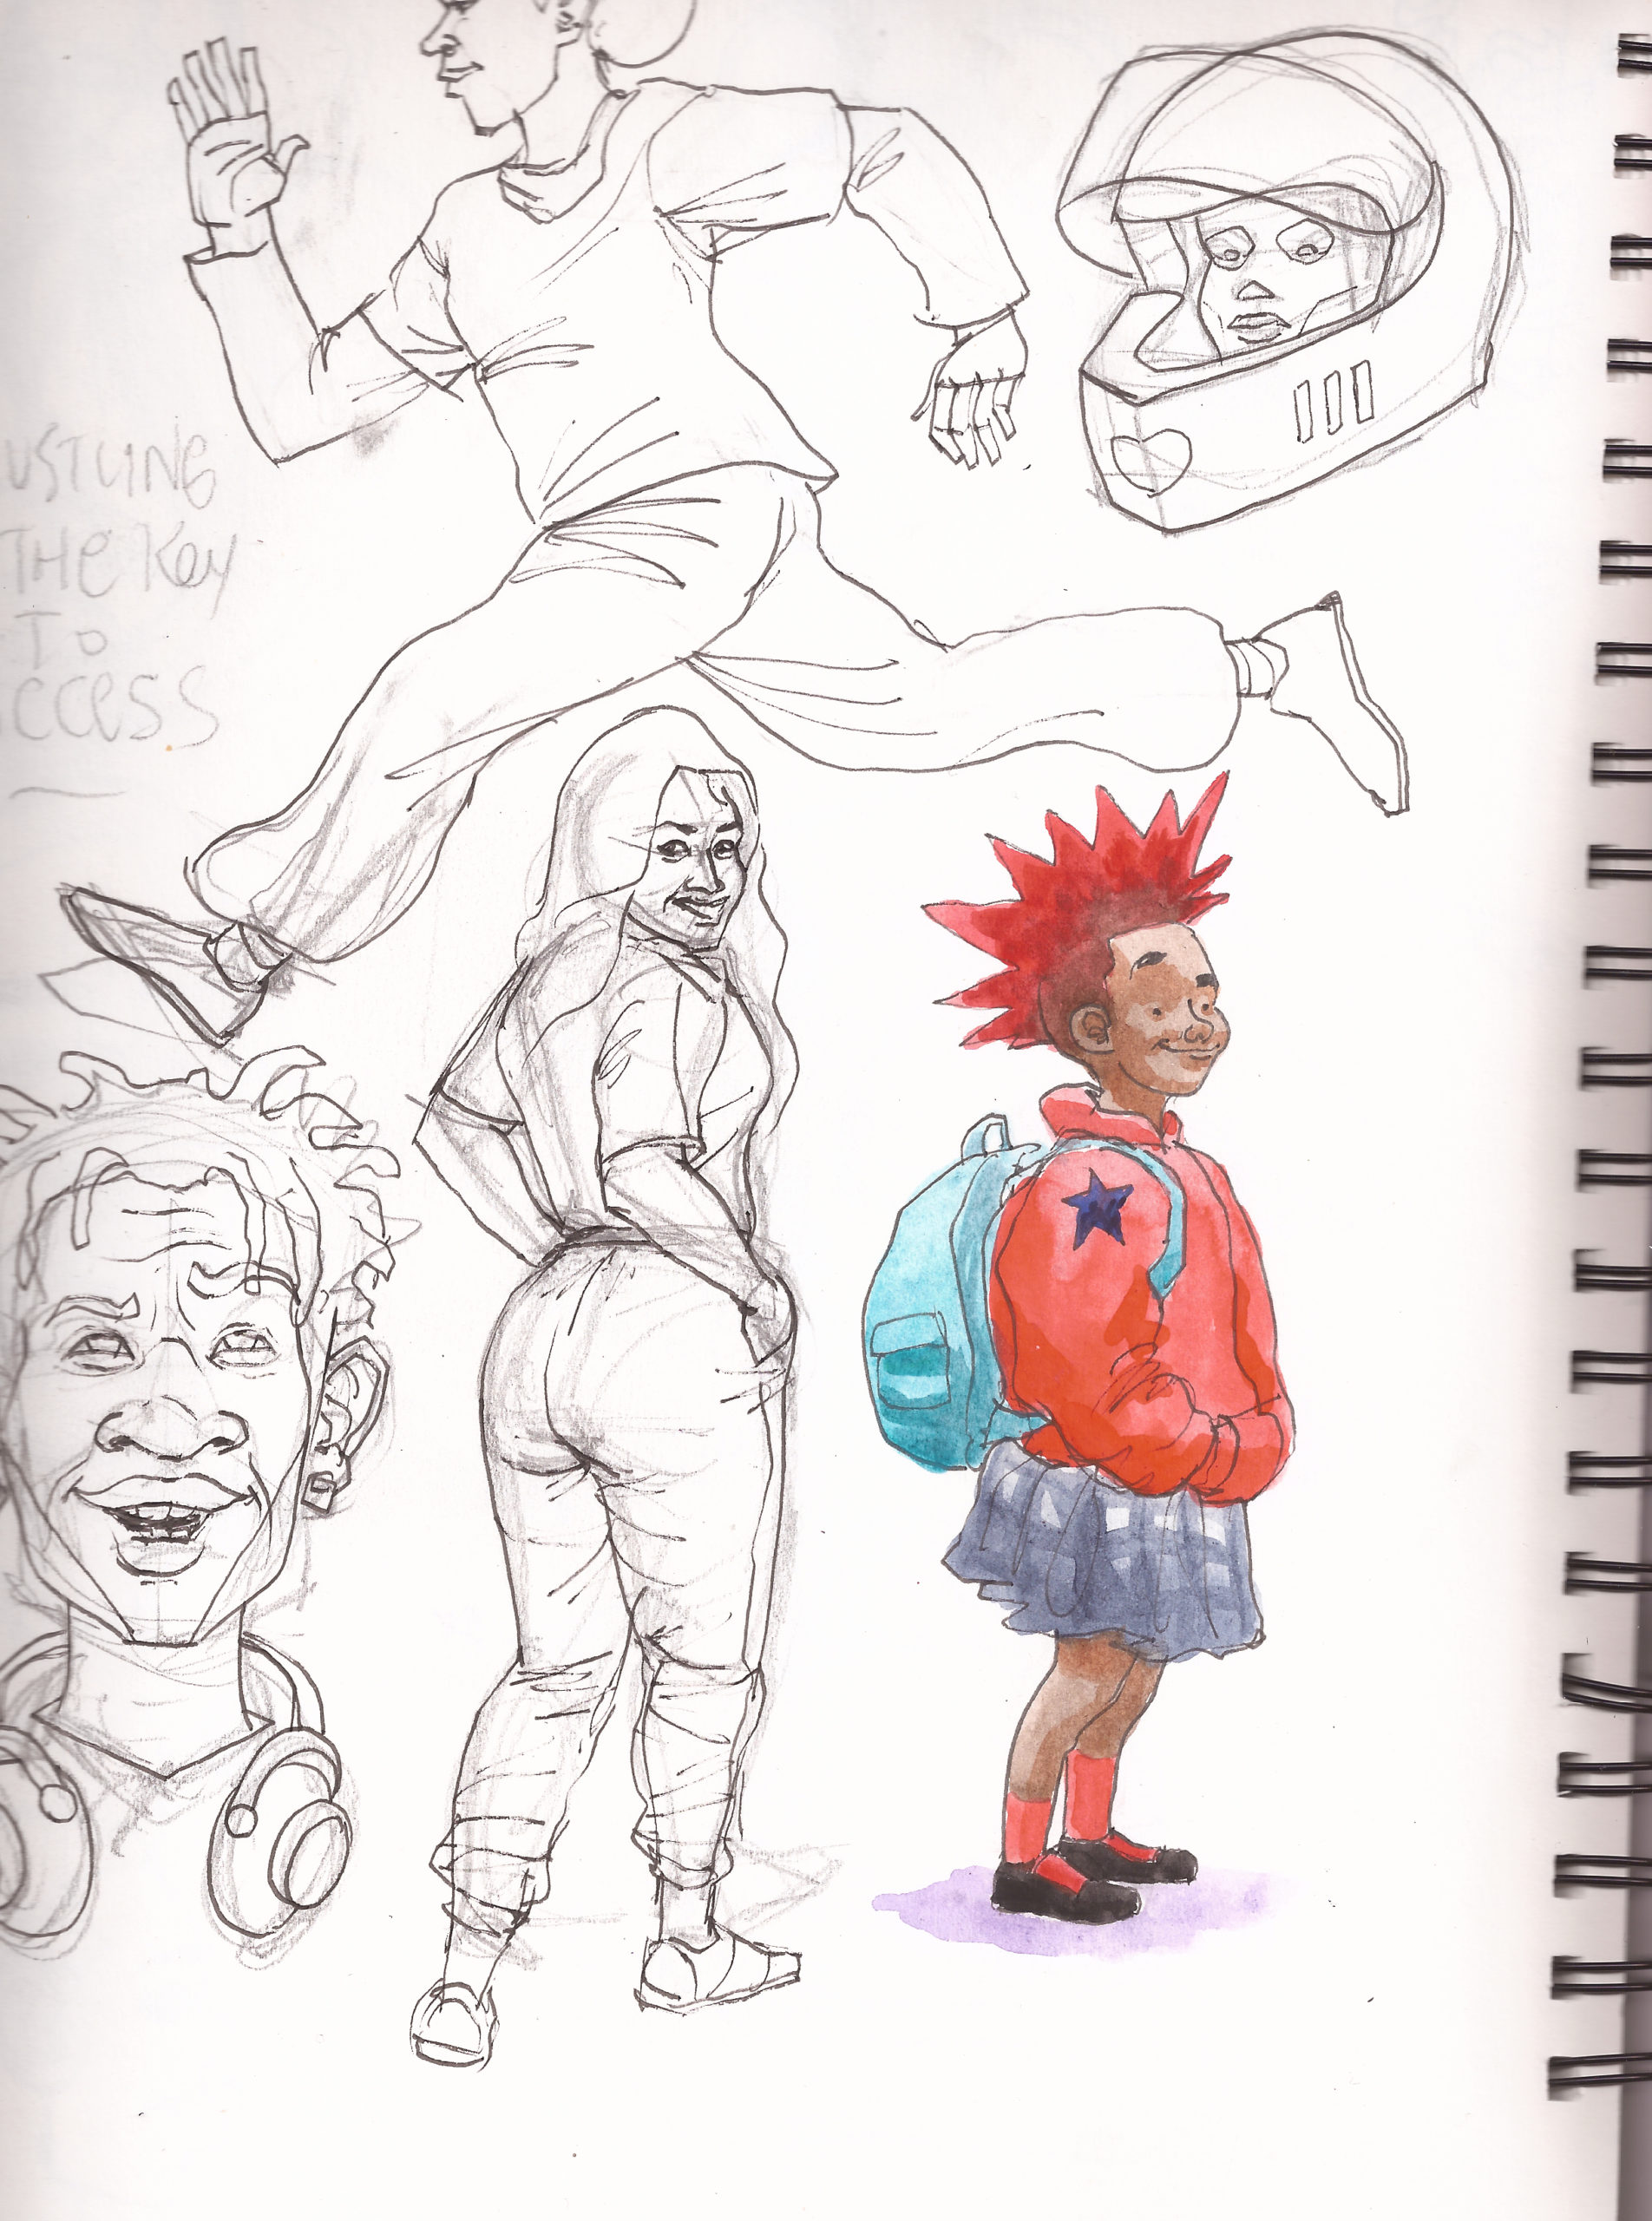 The page from my sketchbook